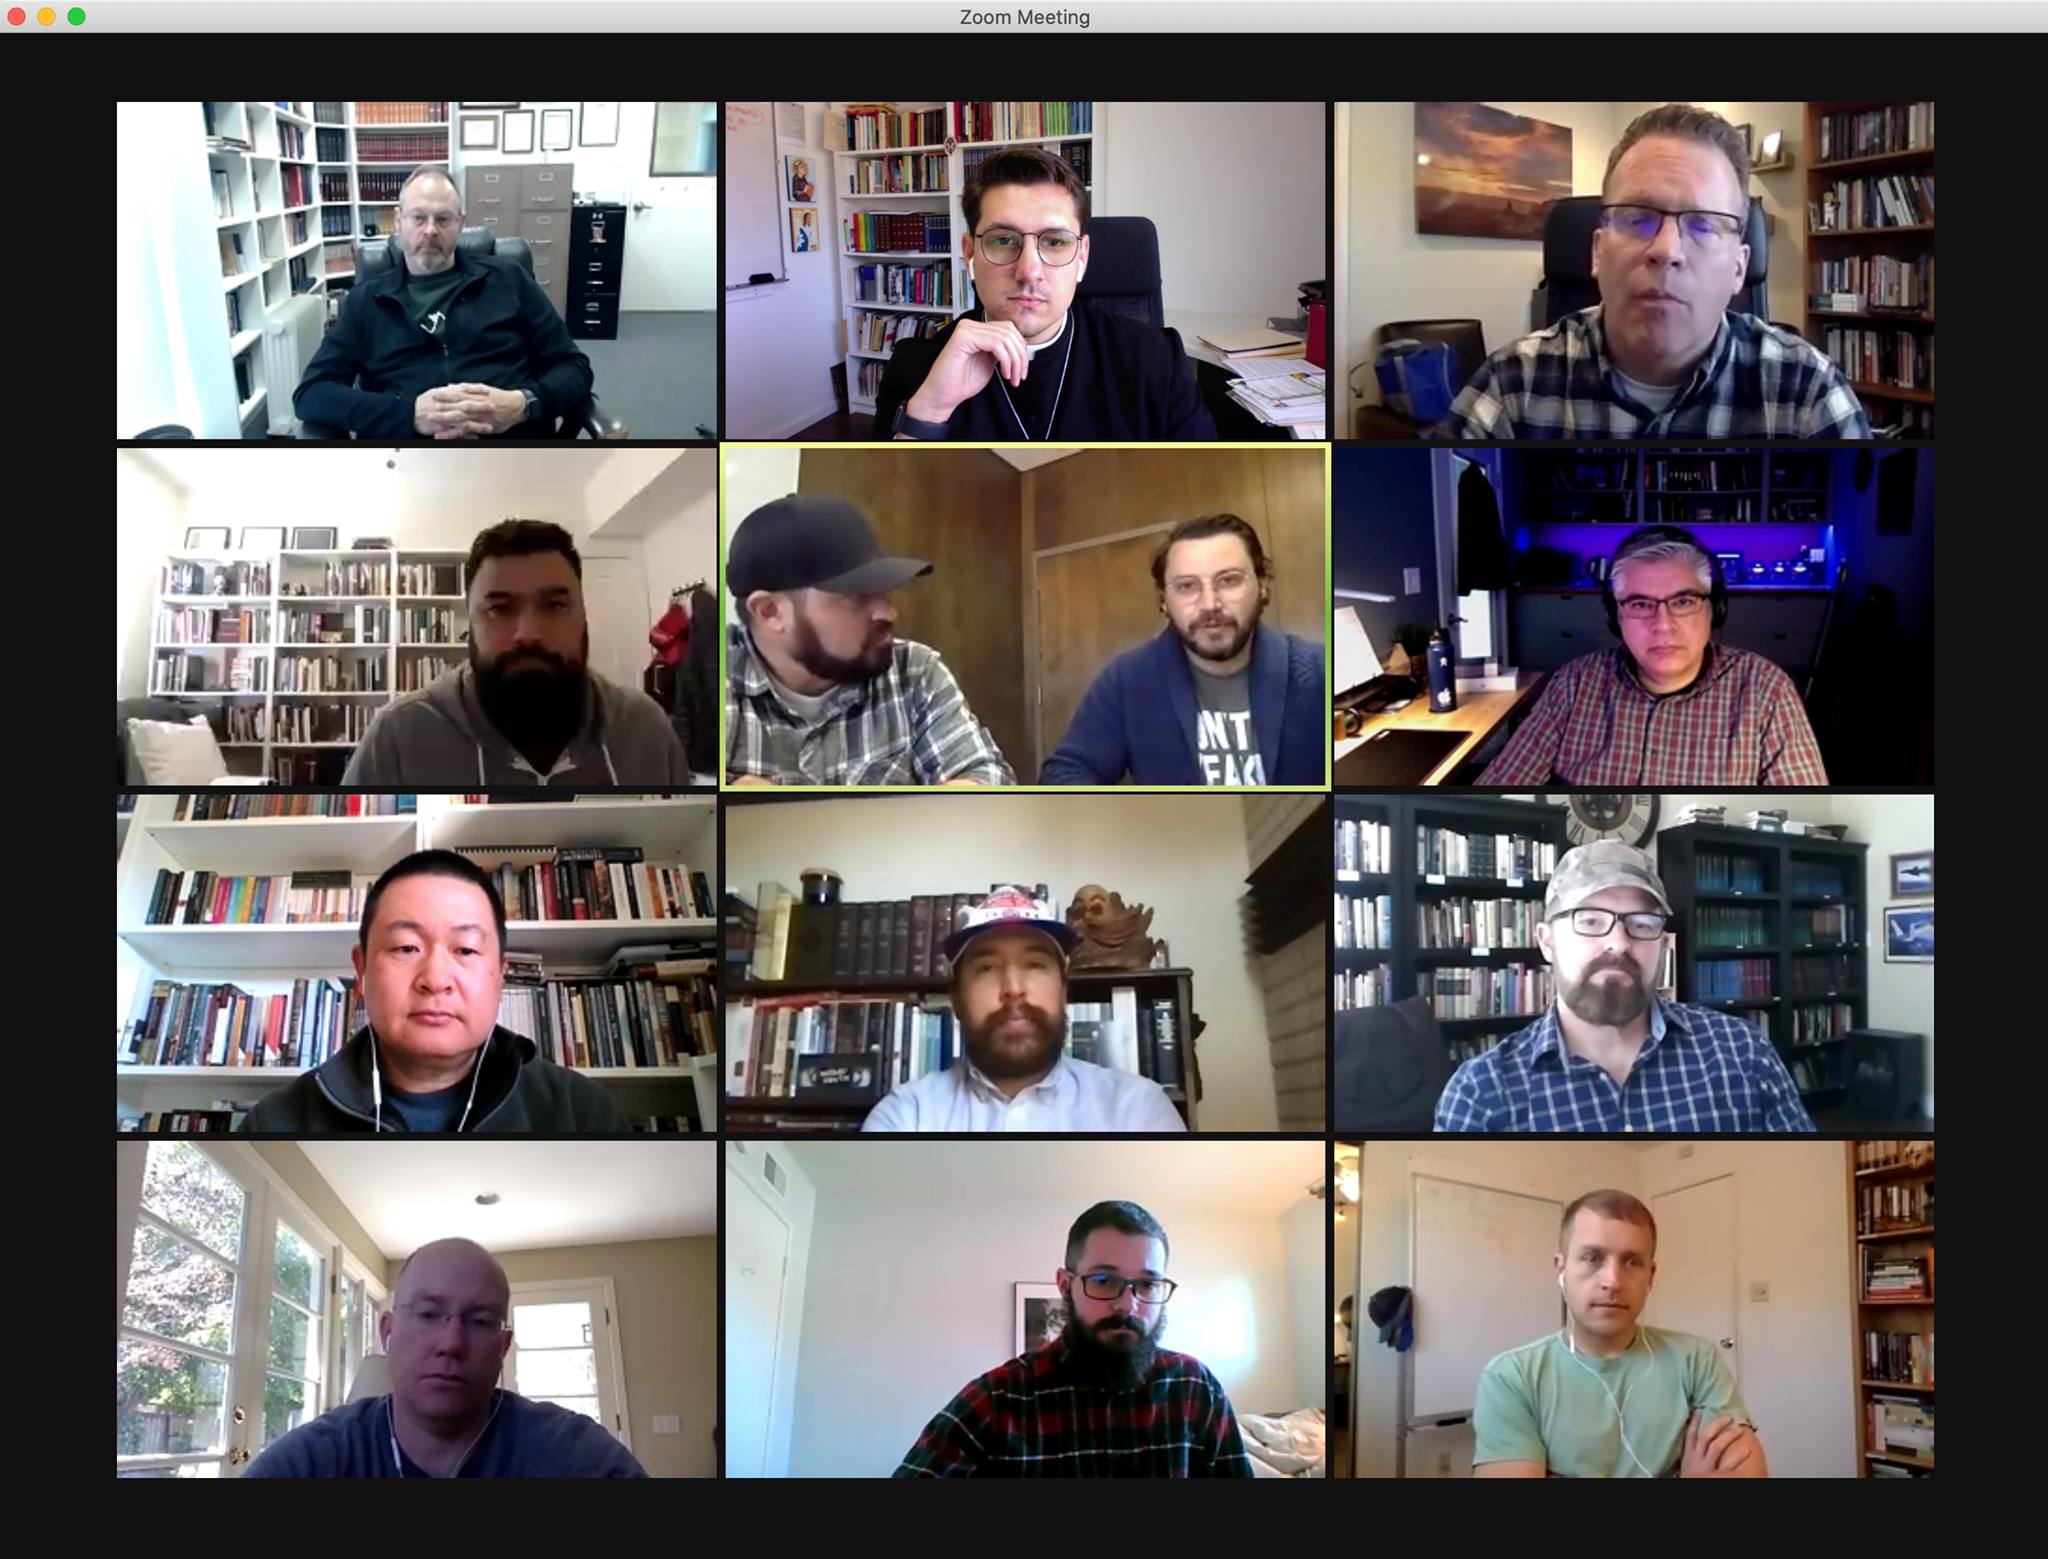 Had a virtual lunch with “The Gospel Coalition” (TGC) South Bay Area Pastors Network. Praying together as we all pastor through COVIDtide.